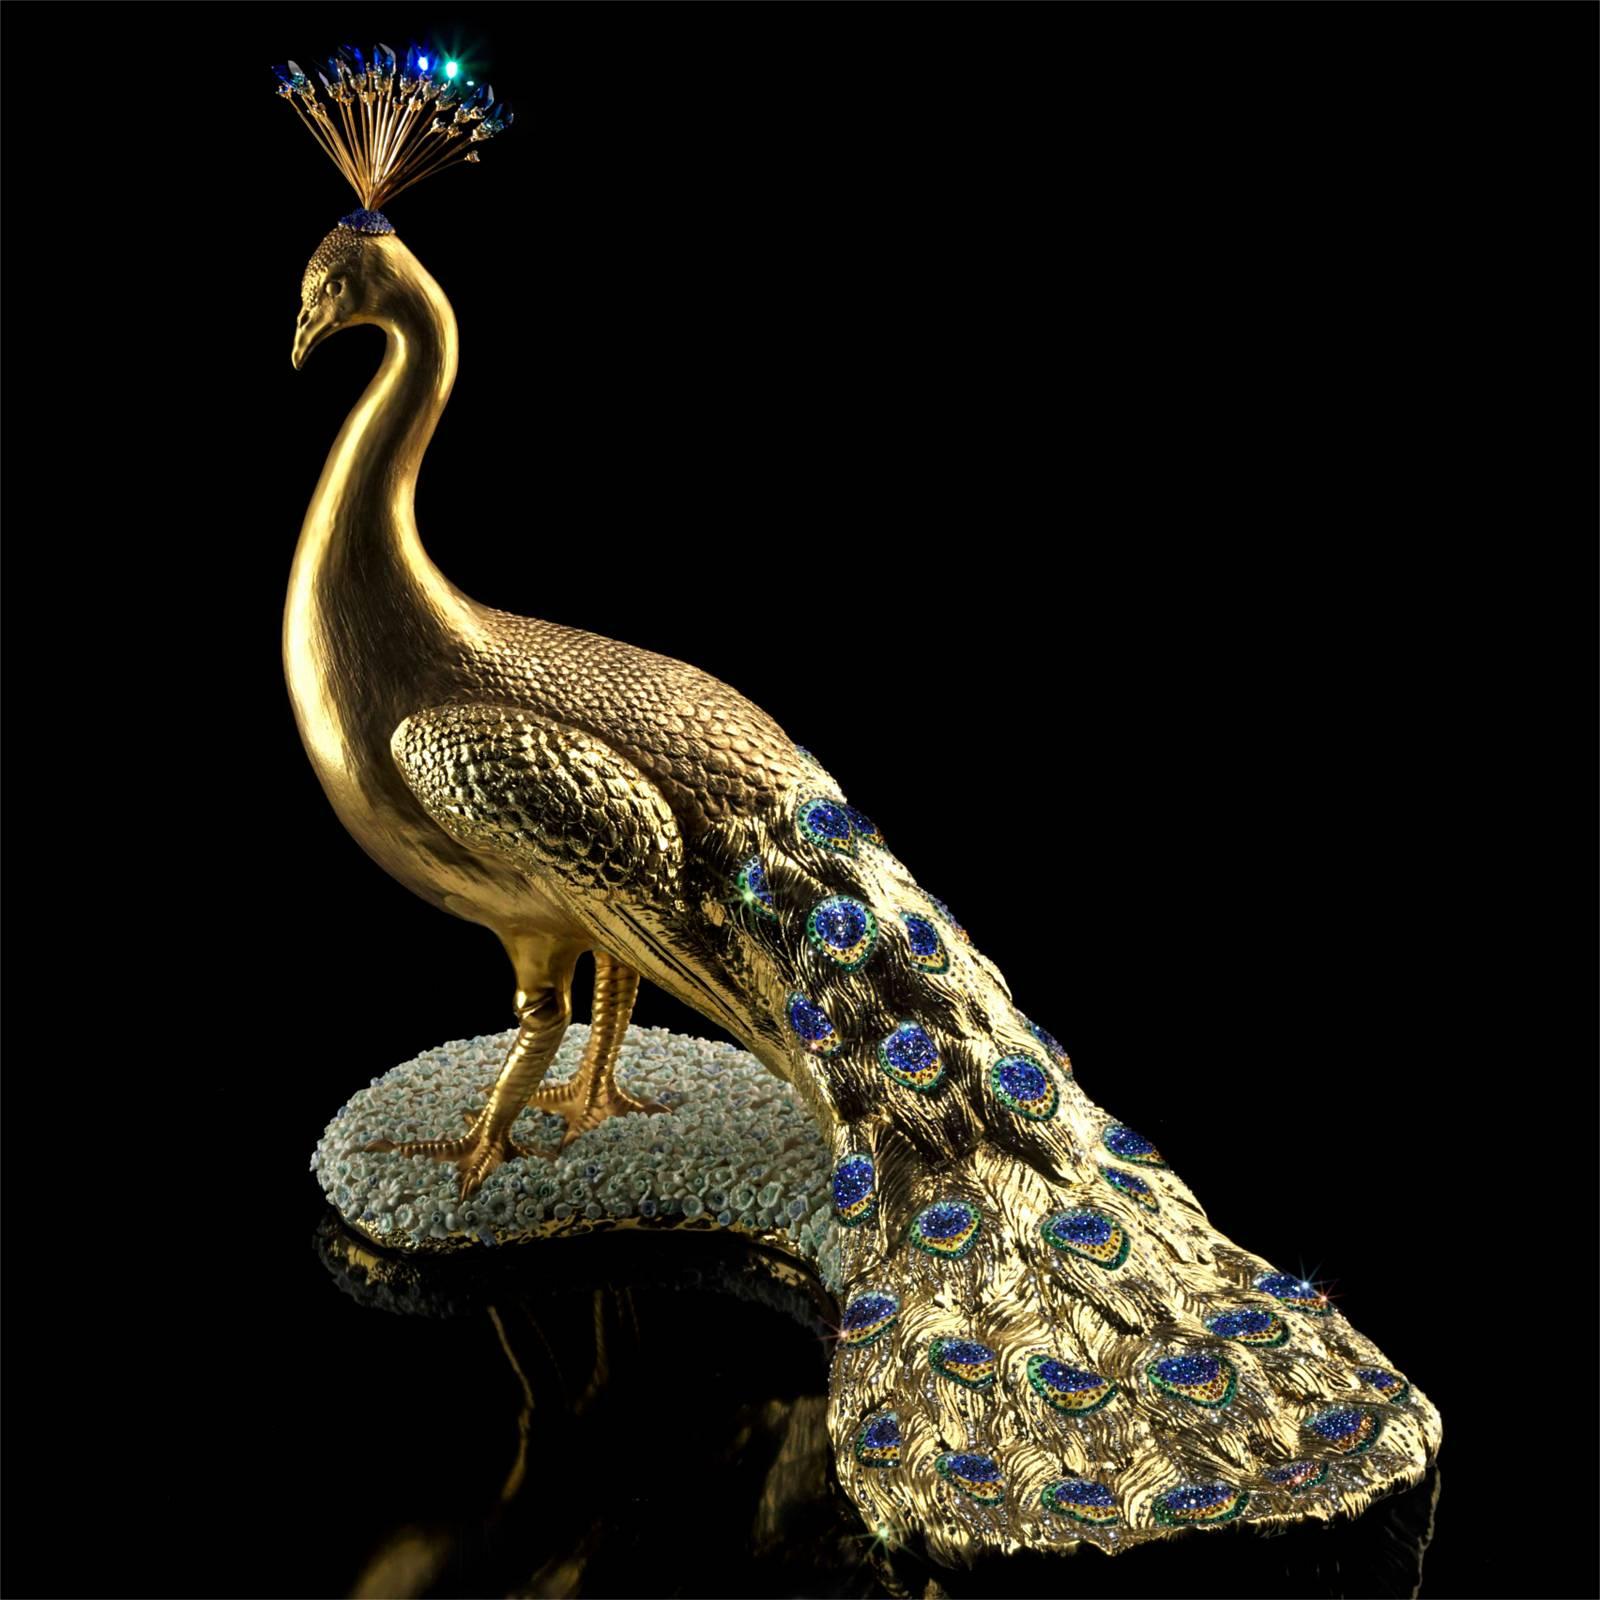 Sculpture gilded peacock handmade in precious porcelain
one by one, feather by feather. Each feather is unique. Made
with shiny porcelain, hand-painted with 24-karat gold and precious colors.
24-karat gold-plated brass base and crystallized with